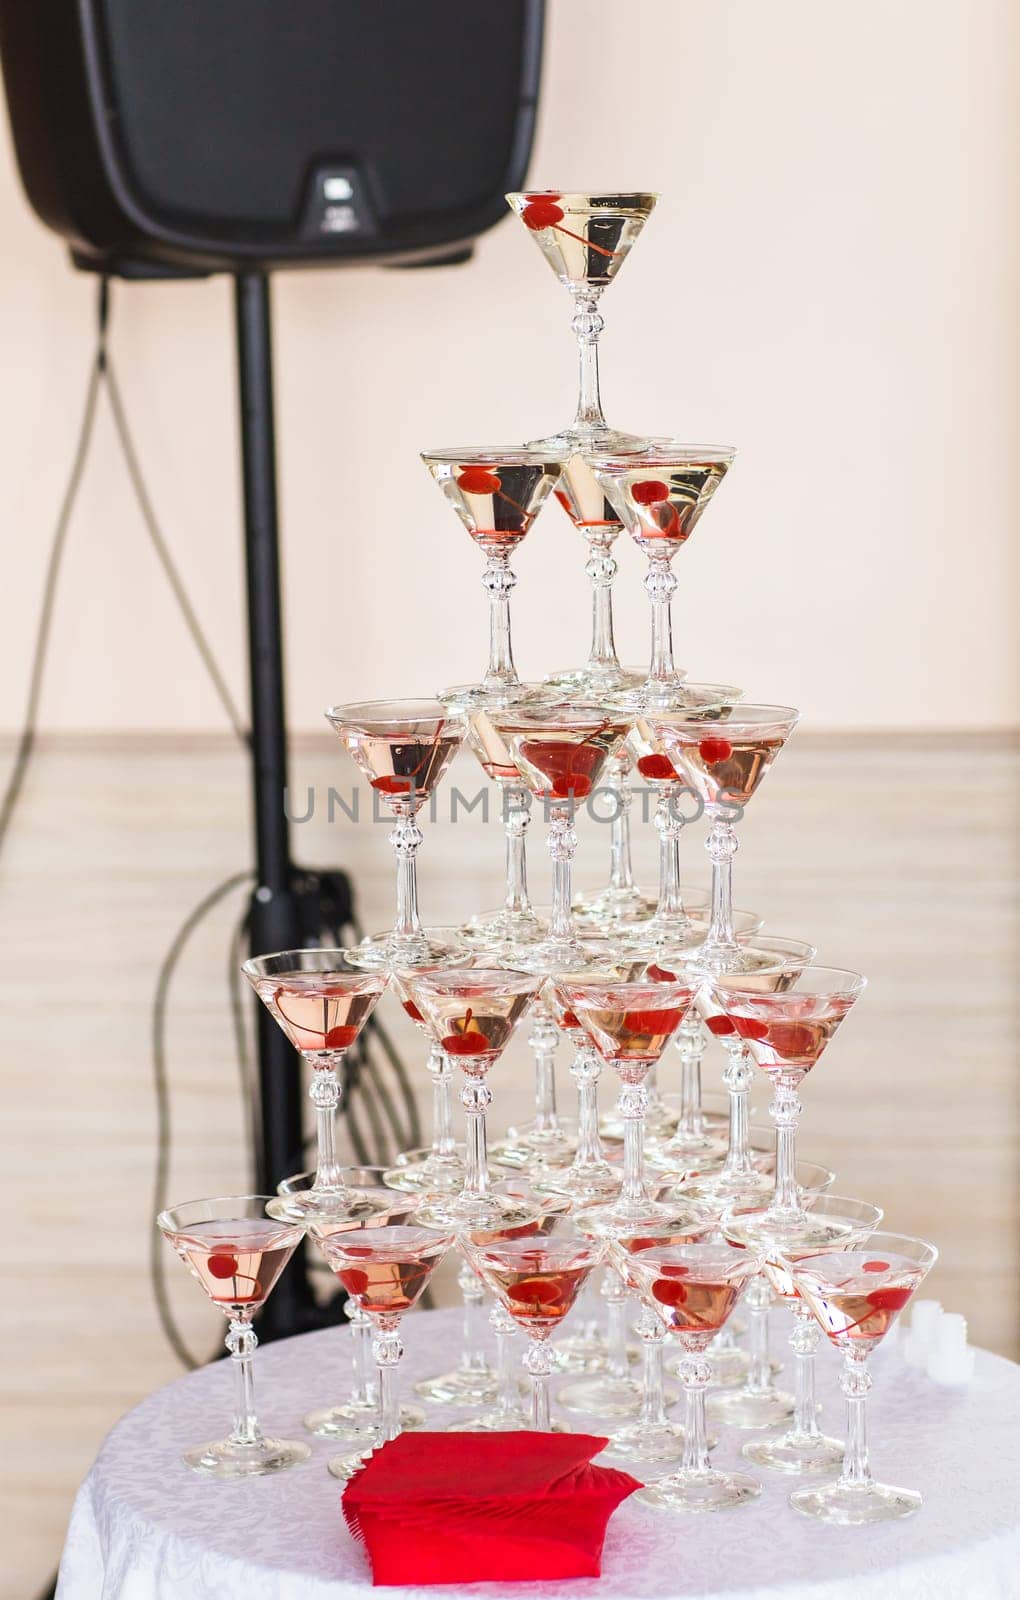 Champagne pyramid on event, party or wedding banquet reception by Satura86